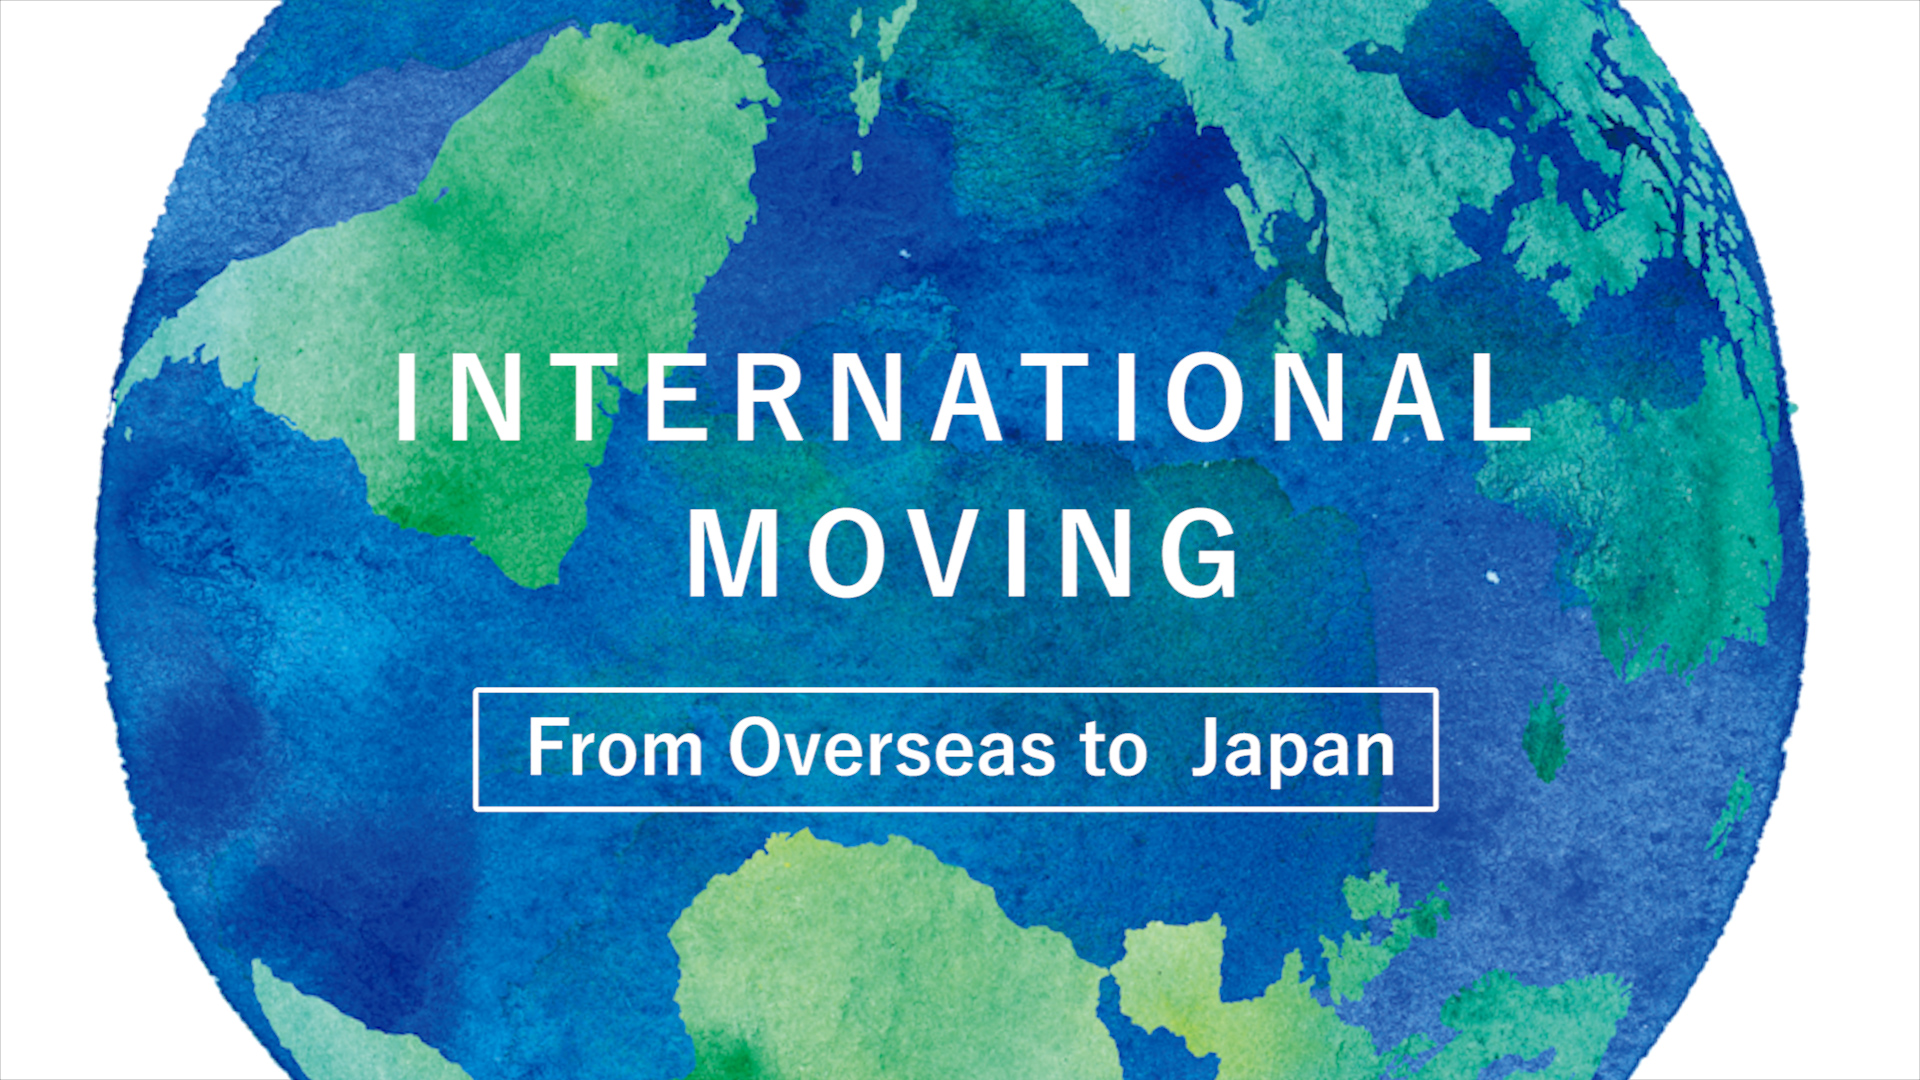 From Overseas to Japan